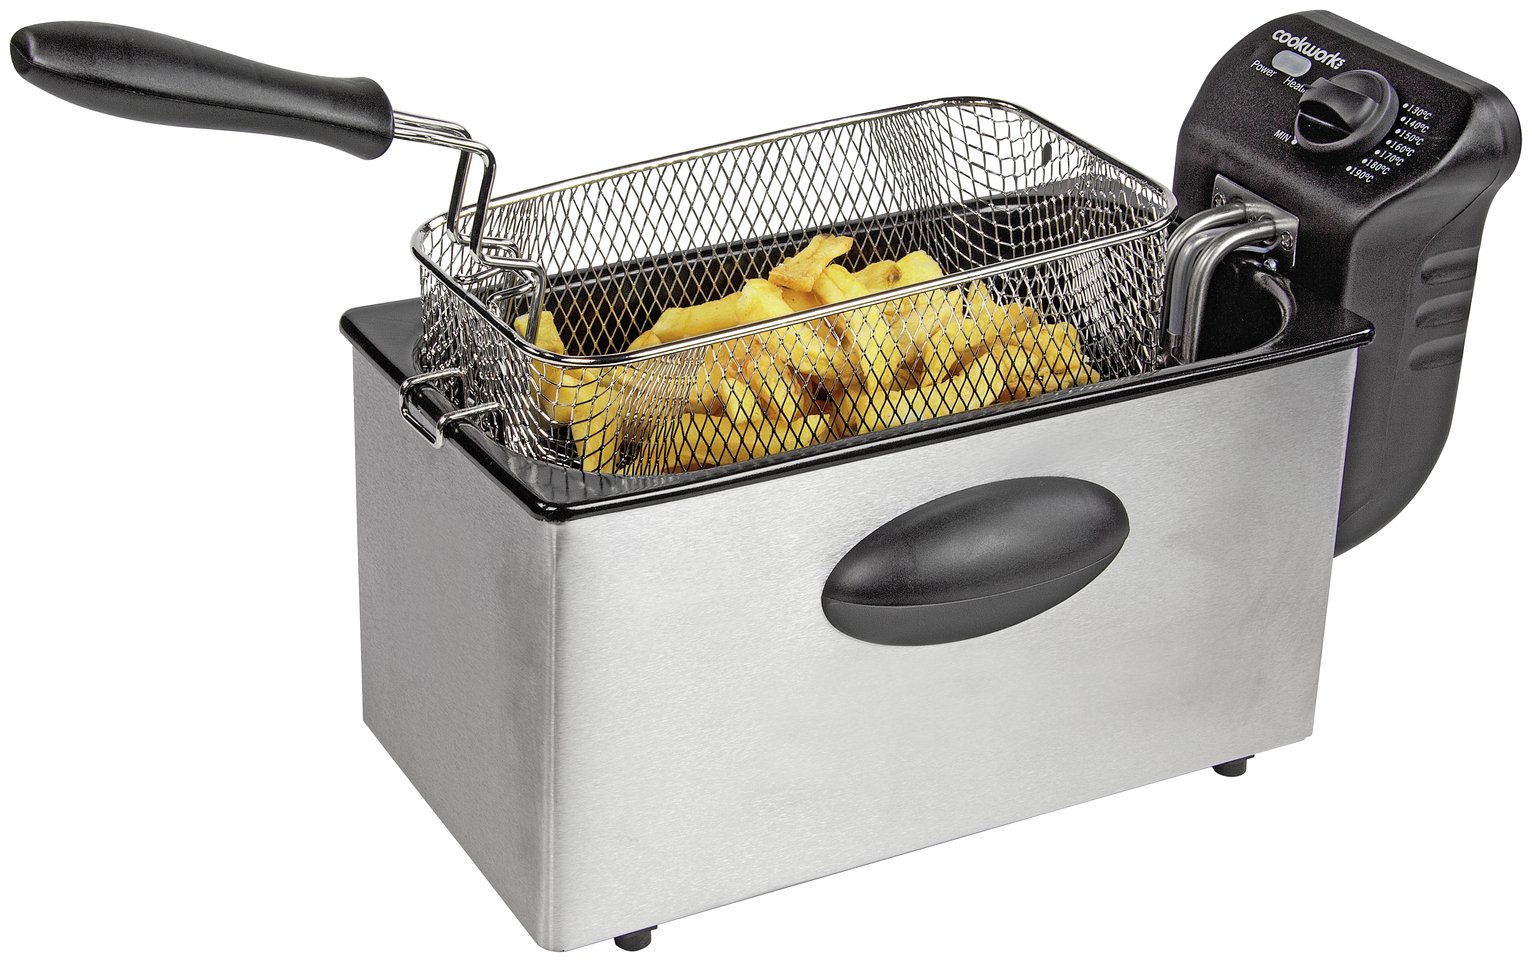 Cookworks Semi Professional Fryer - Stainless Steel